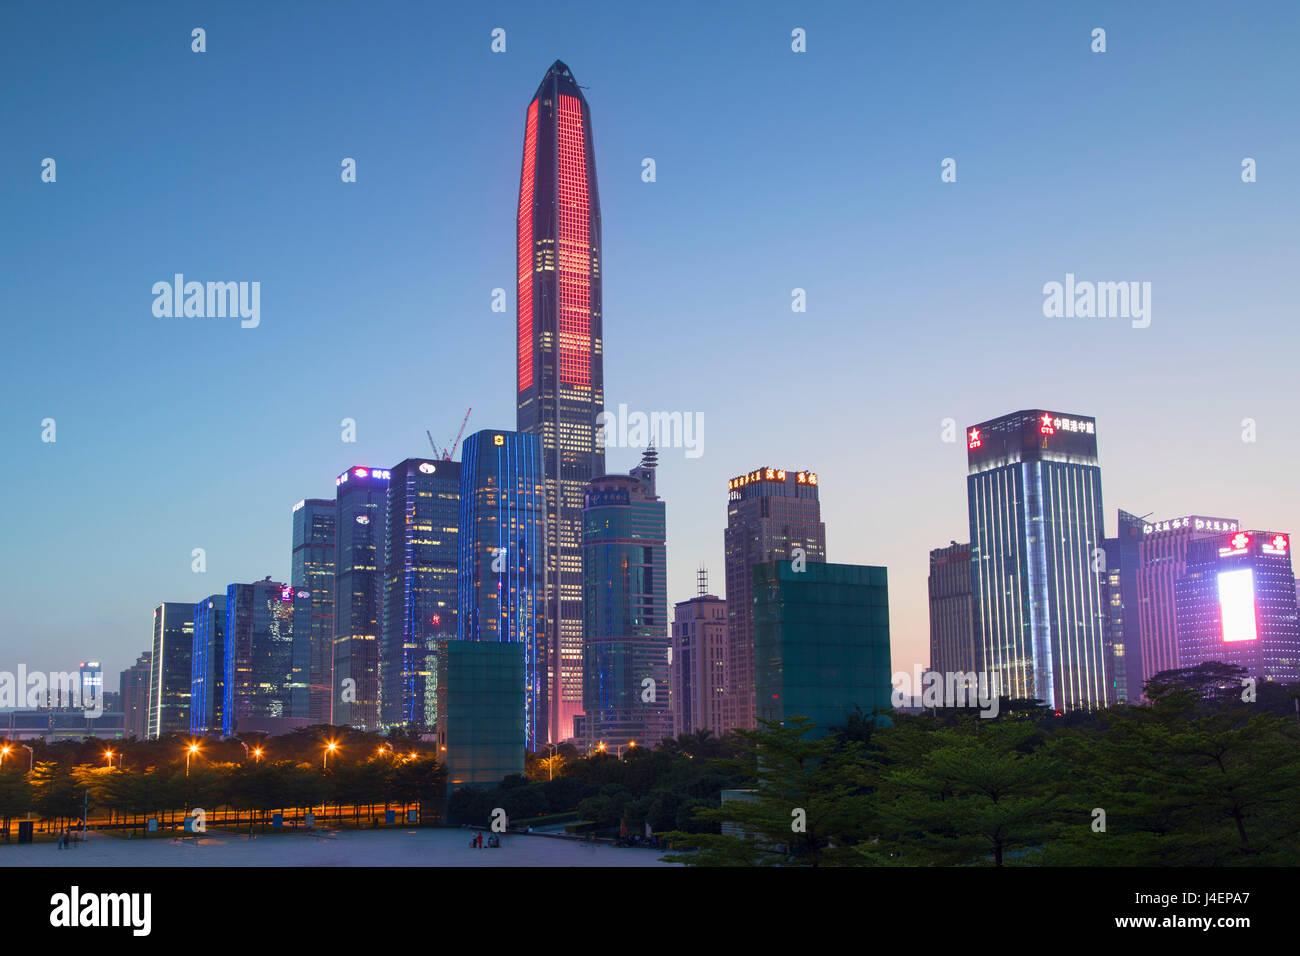 Ping An International Finance Centre, world's fourth tallest building in 2017 at 600m, and Civic Square, Futian, Shenzhen, China Stock Photo